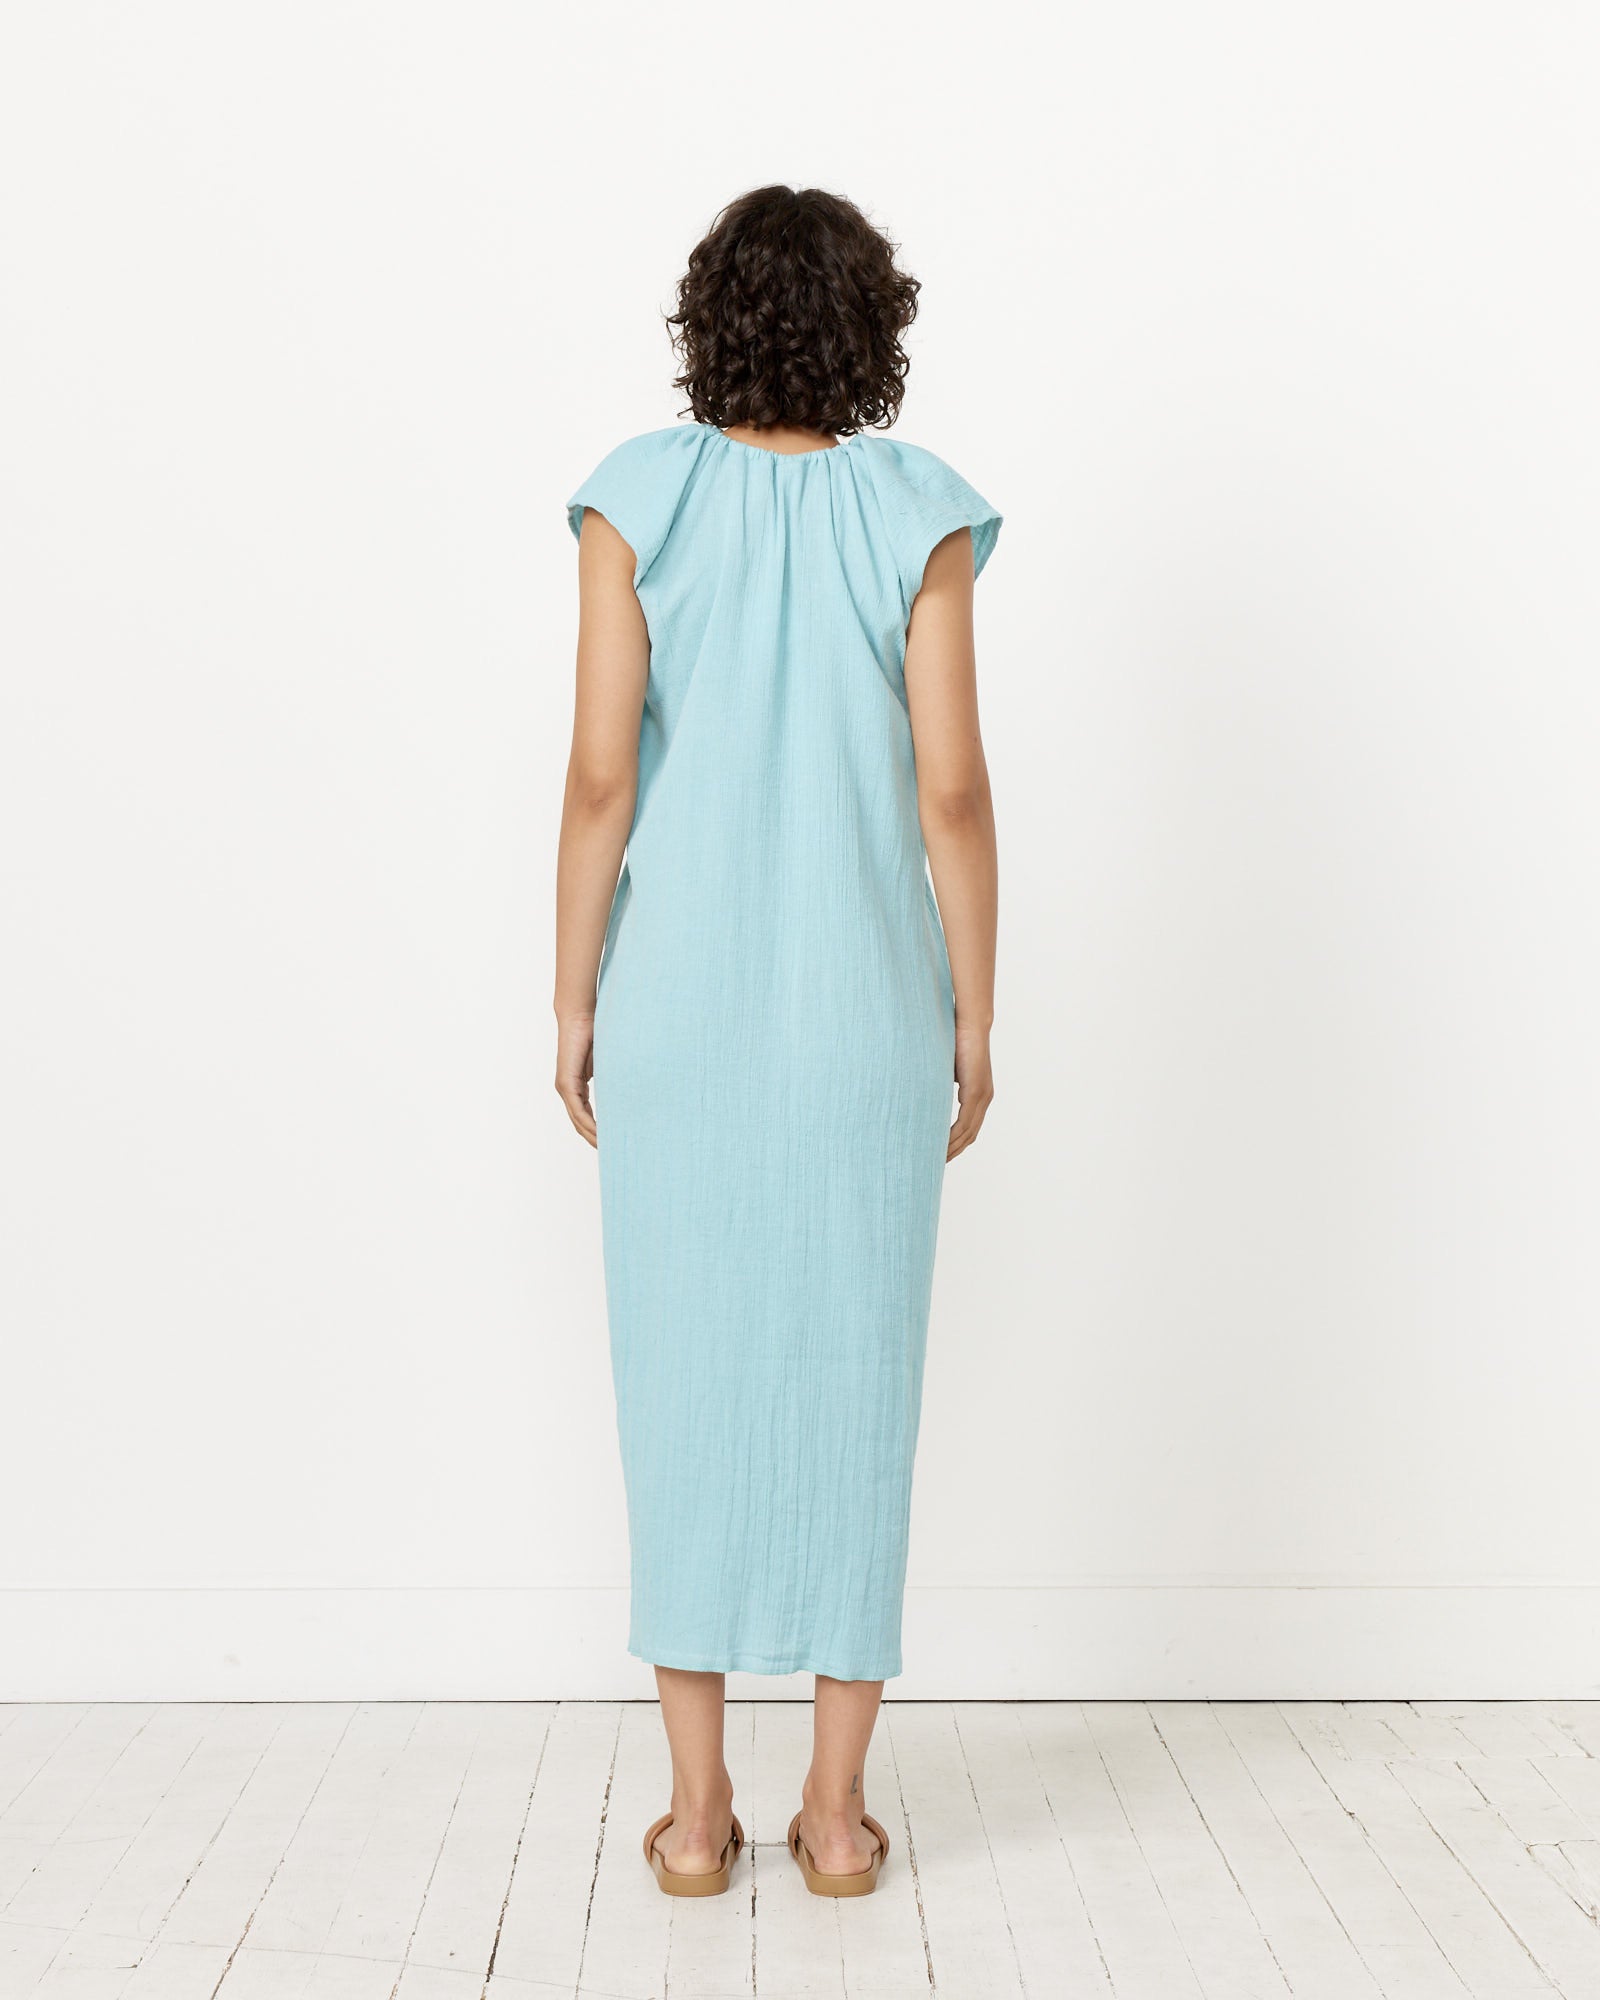 Max Dress in Wuxi Blue